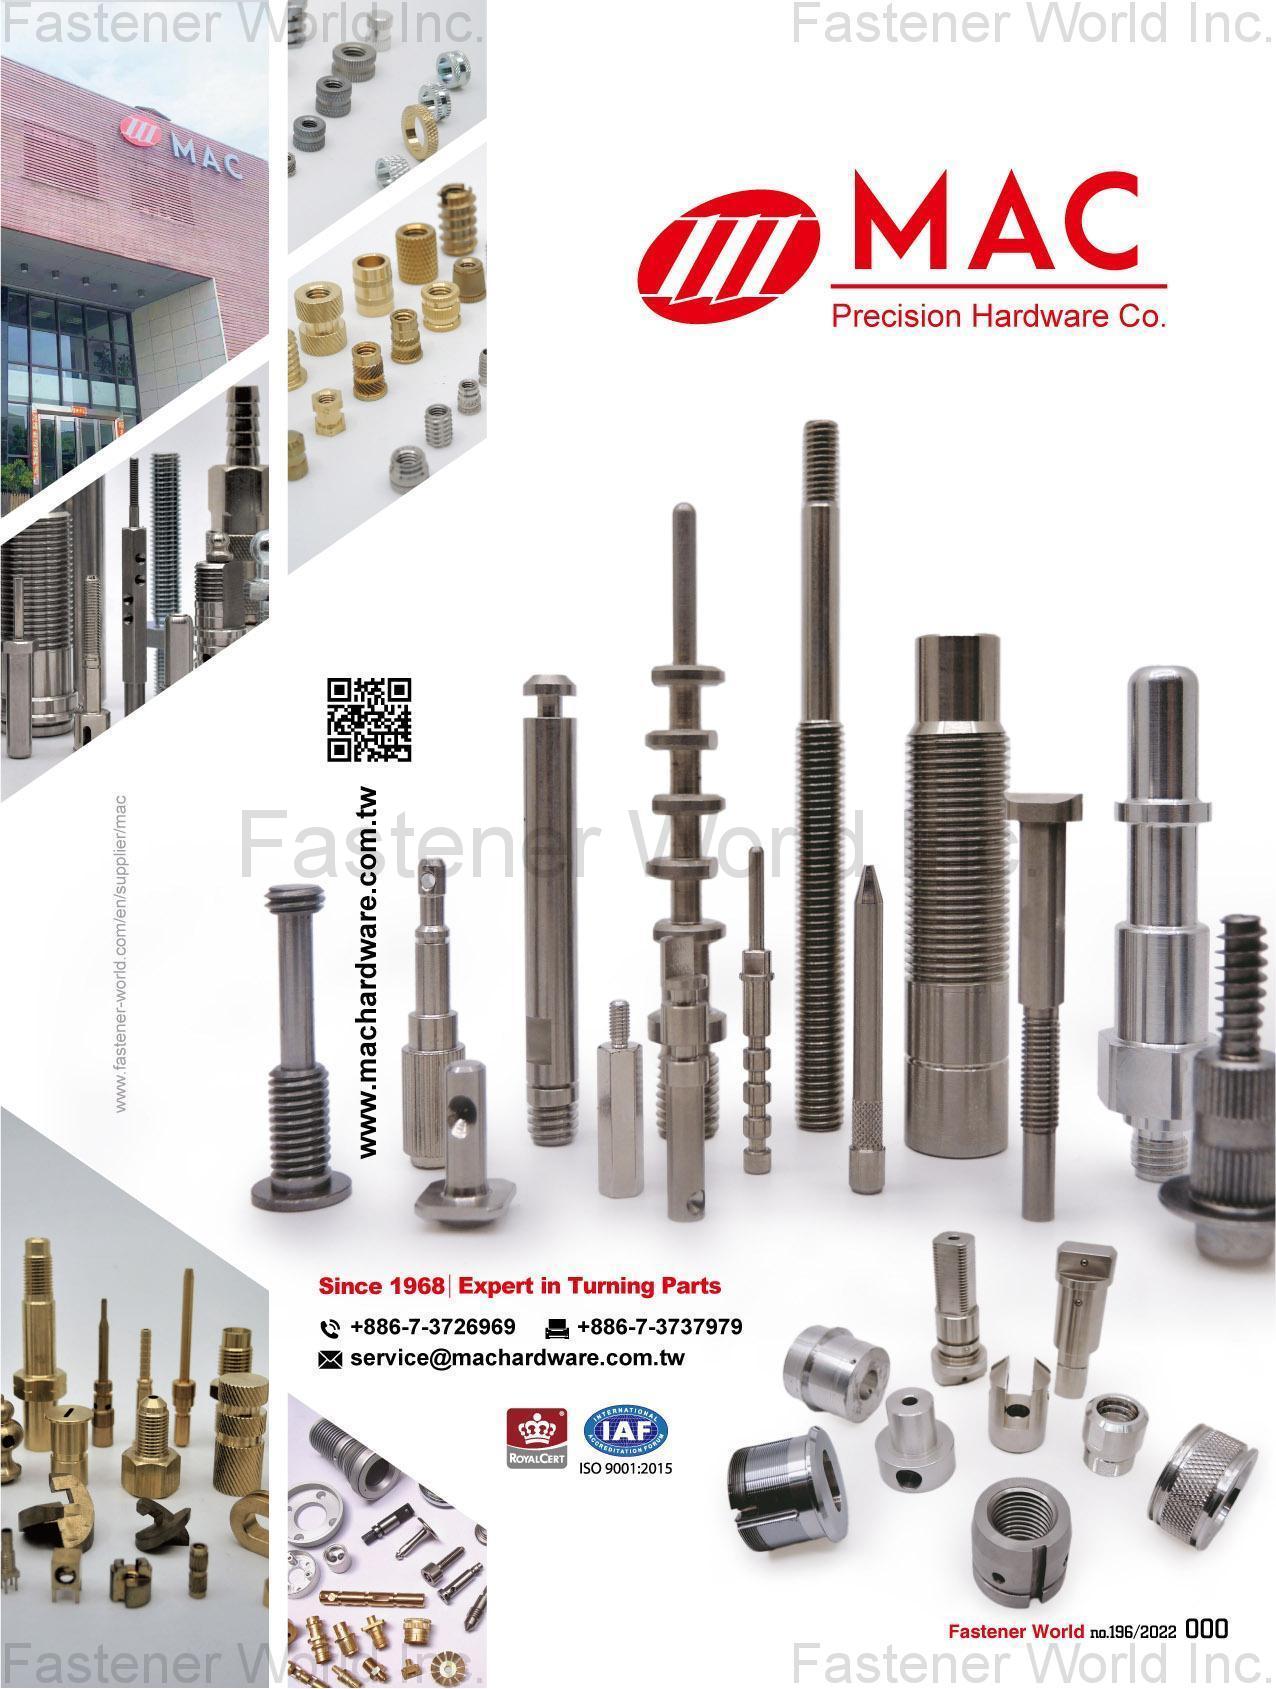 MAC PRECISION HARDWARE CO. , Precision Turning Parts,Locking Beads,Assembly Parts,Cold/Hot Forging Parts,Extrusion Parts,Bolt-nut,Precision Shaft Parts,Hydraulic Fitting,Die Casting Parts,Pipe Joint,Stamping Parts,Lock Accessories,Plastic Injection Parts,Valve rod/Valve element